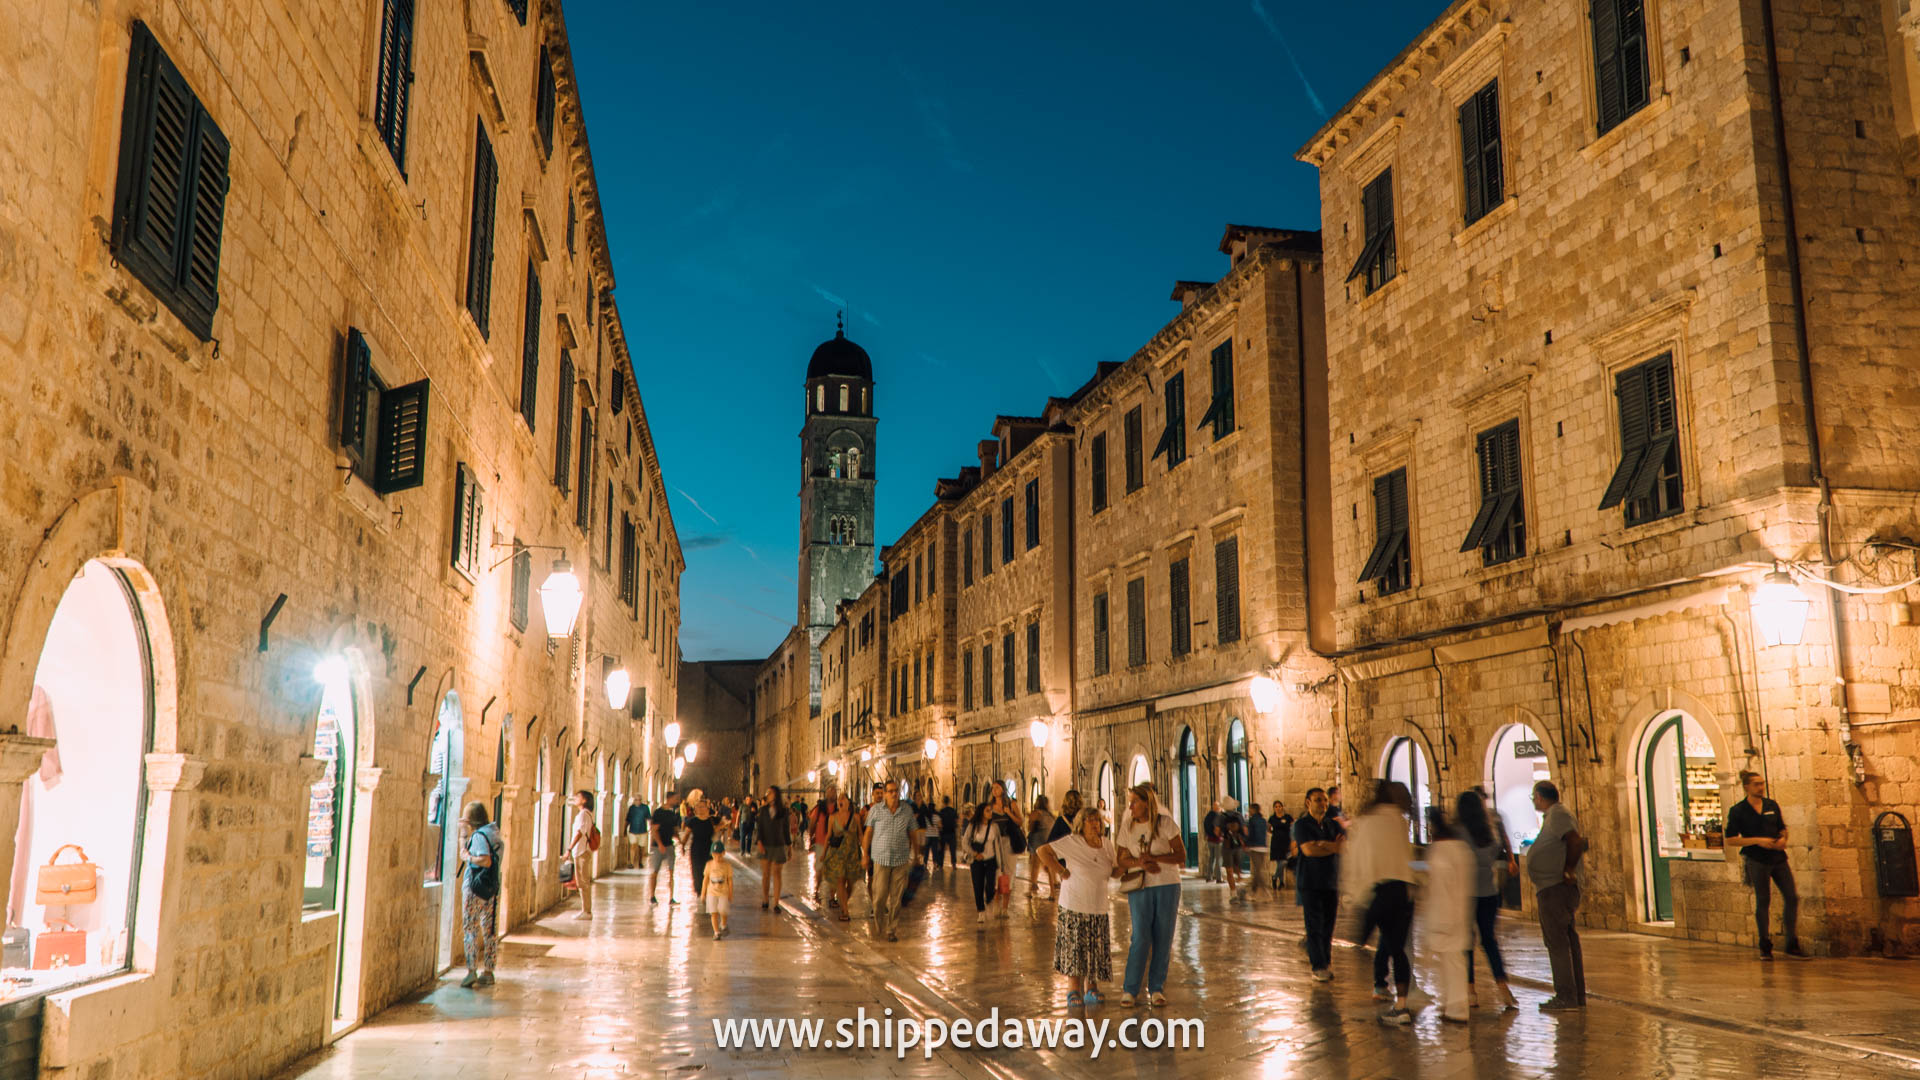 top things to do in dubrovnik, best time to visit dubrovnik, dubrovnik old town, dubrovnik croatia, low season in dubrovnik, dubrovnik by night